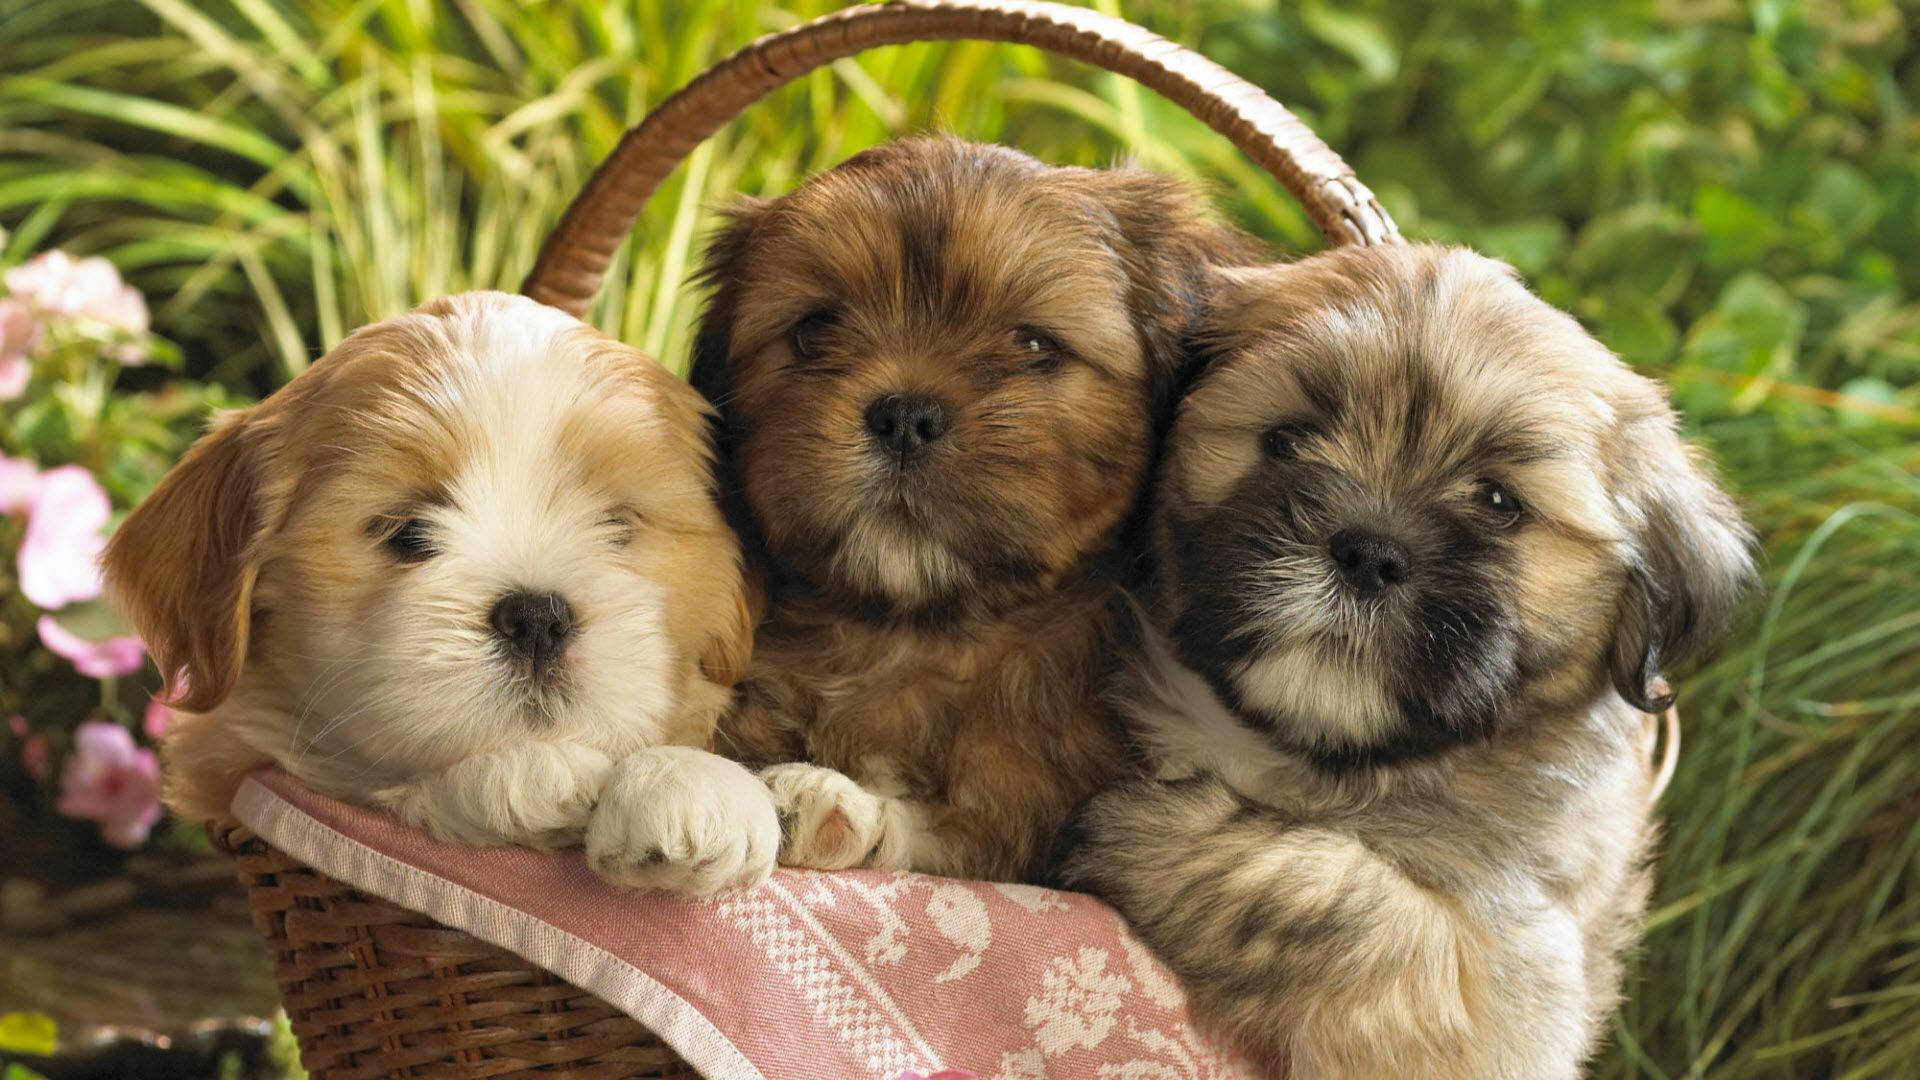 Puppies In The Basket Background